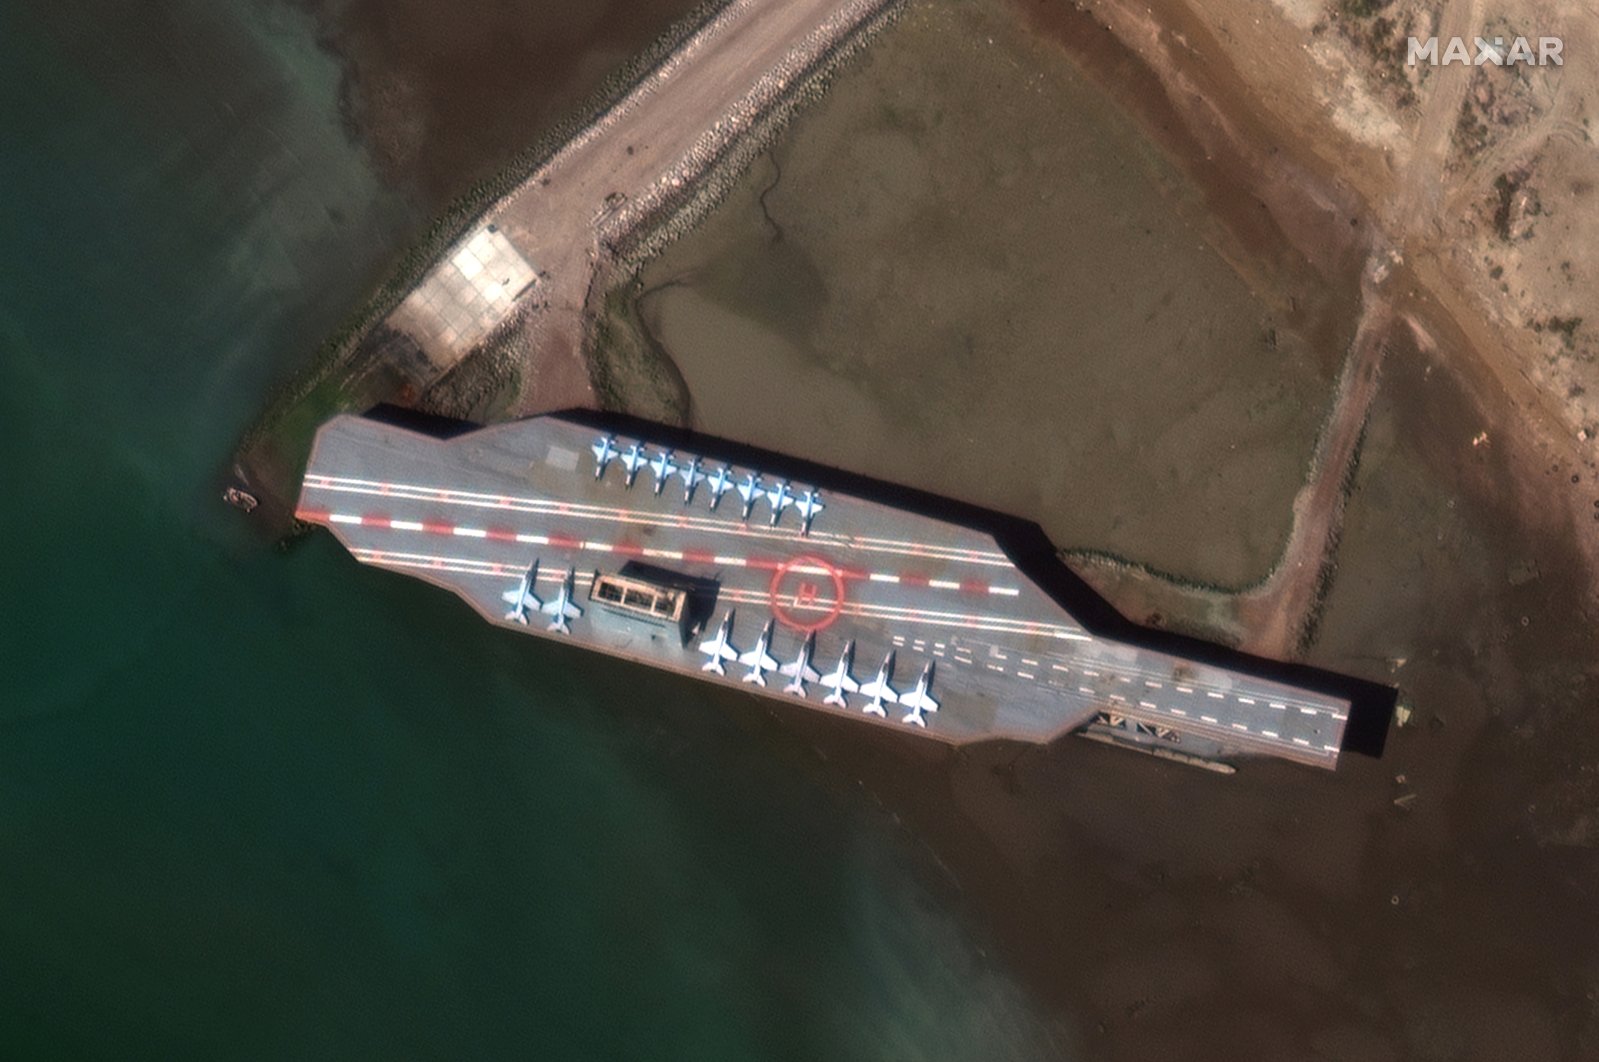 Iran's refurbished mock-up aircraft carrier, used previously as a simulated U.S. target during a February 2015 Iranian naval war games exercise, is seen at its homeport of Bandar Abbas, Iran, Feb.y 15, 2020. ( Satellite image ©2020 Maxar Technologies Photo via Reuters)